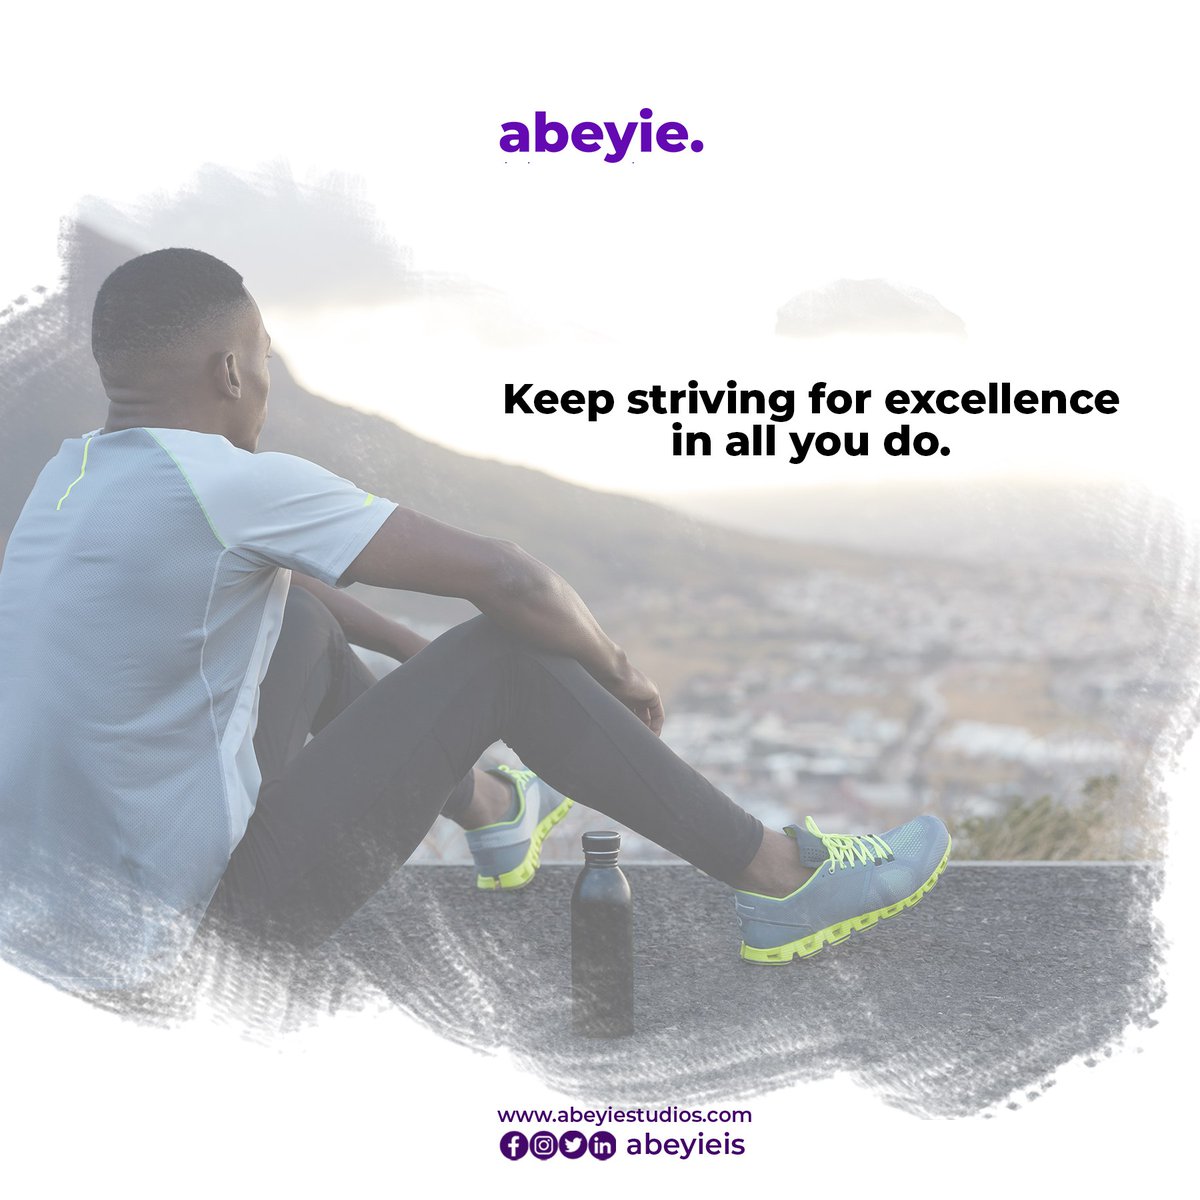 How you do one thing is how you do everything. Keep striving for excellence in all you do. 

#abeyie #execellence #innovation #design #create #mondayvibes #motivateyourself